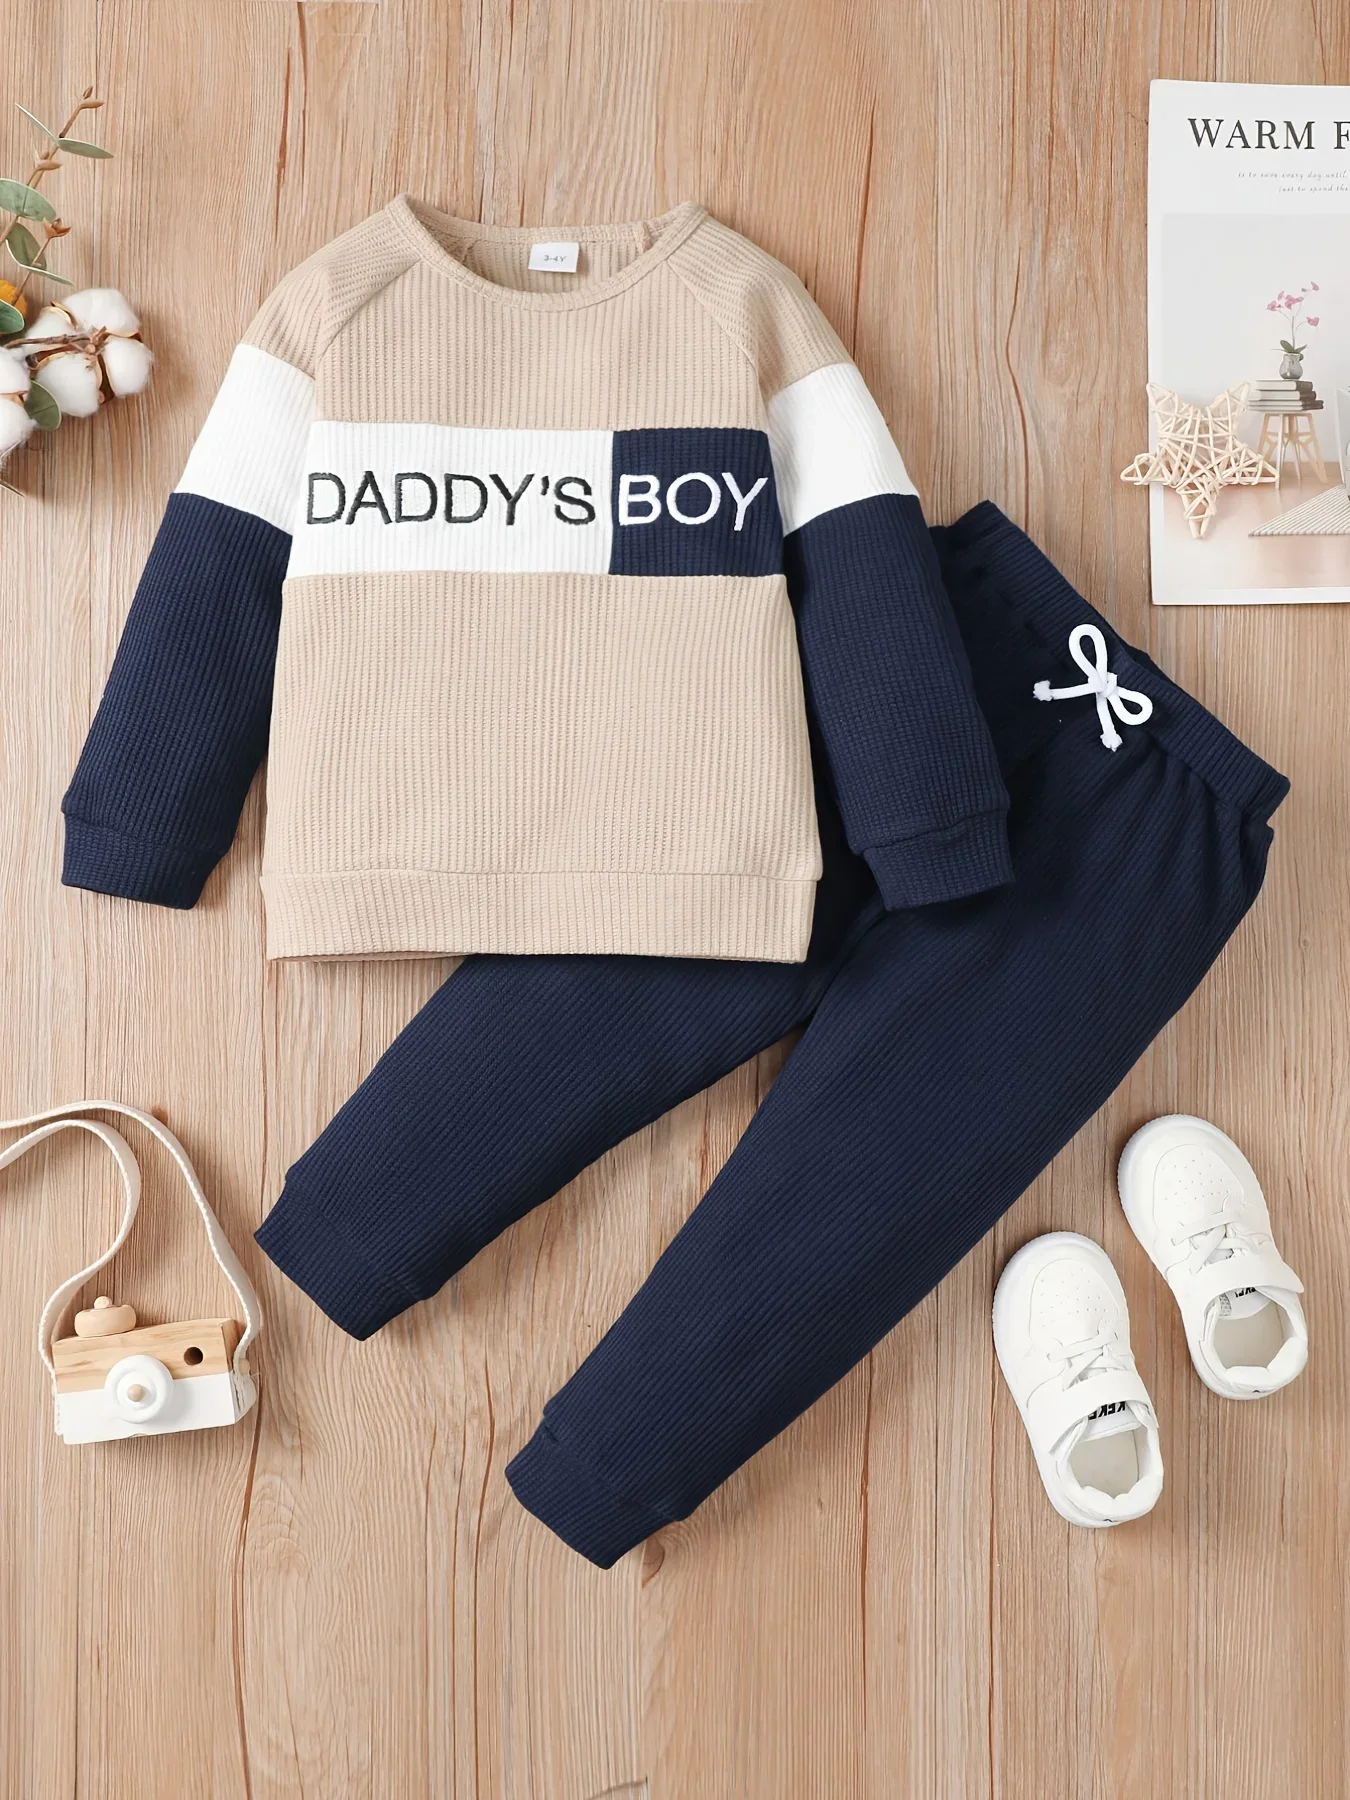 2PCS Casual Clothes Set Kids Boy Color Block Long Sleeve Top+Pant Spring&Autumn Clothing Outfit for Children Boy 1-4Years